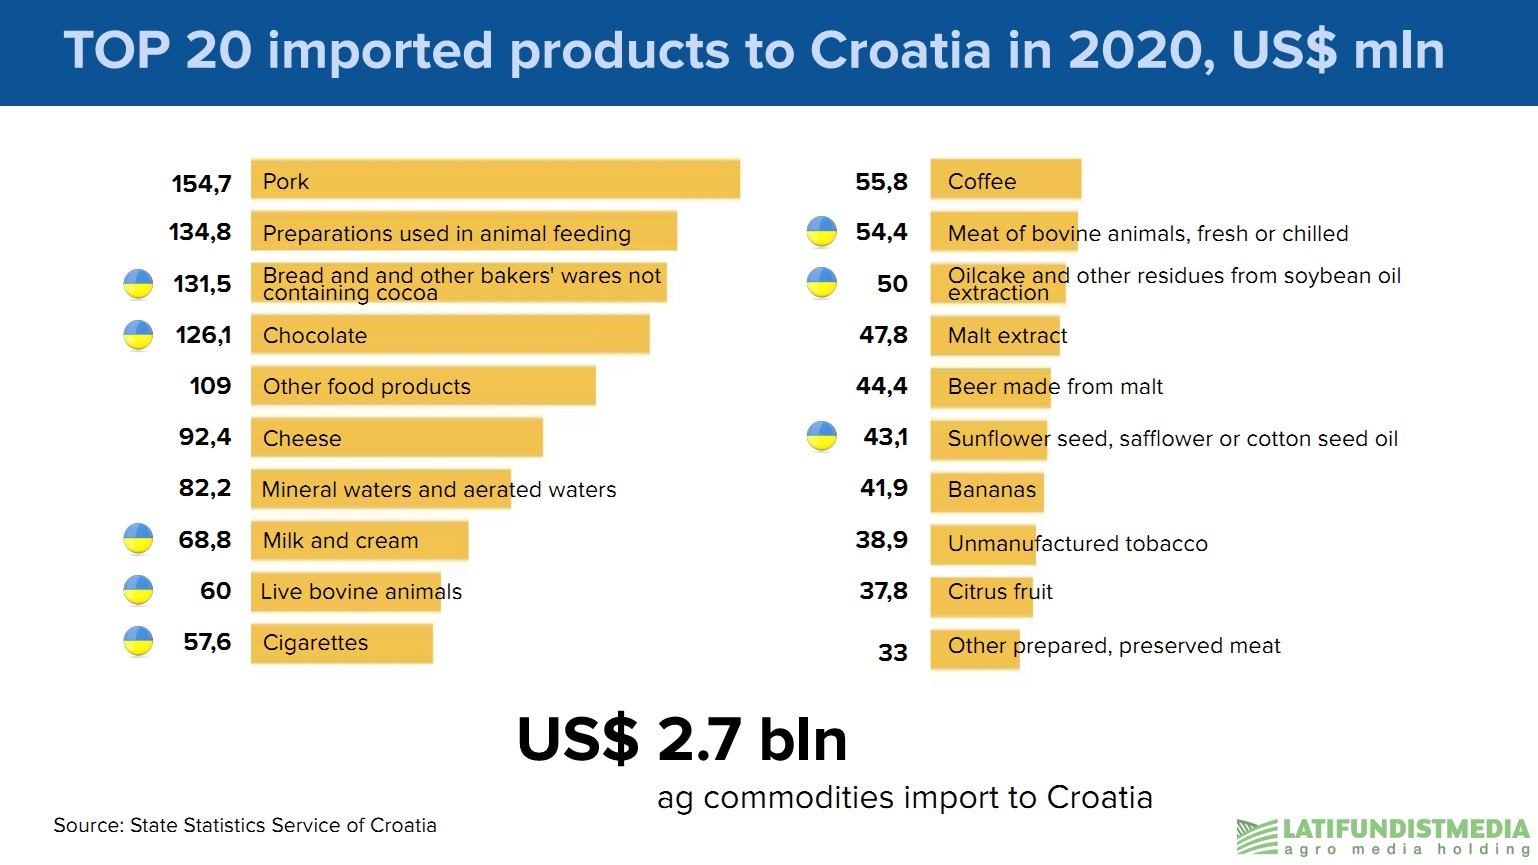 TOP 20 imported products to Croatia in 2020 (click for full resolution)